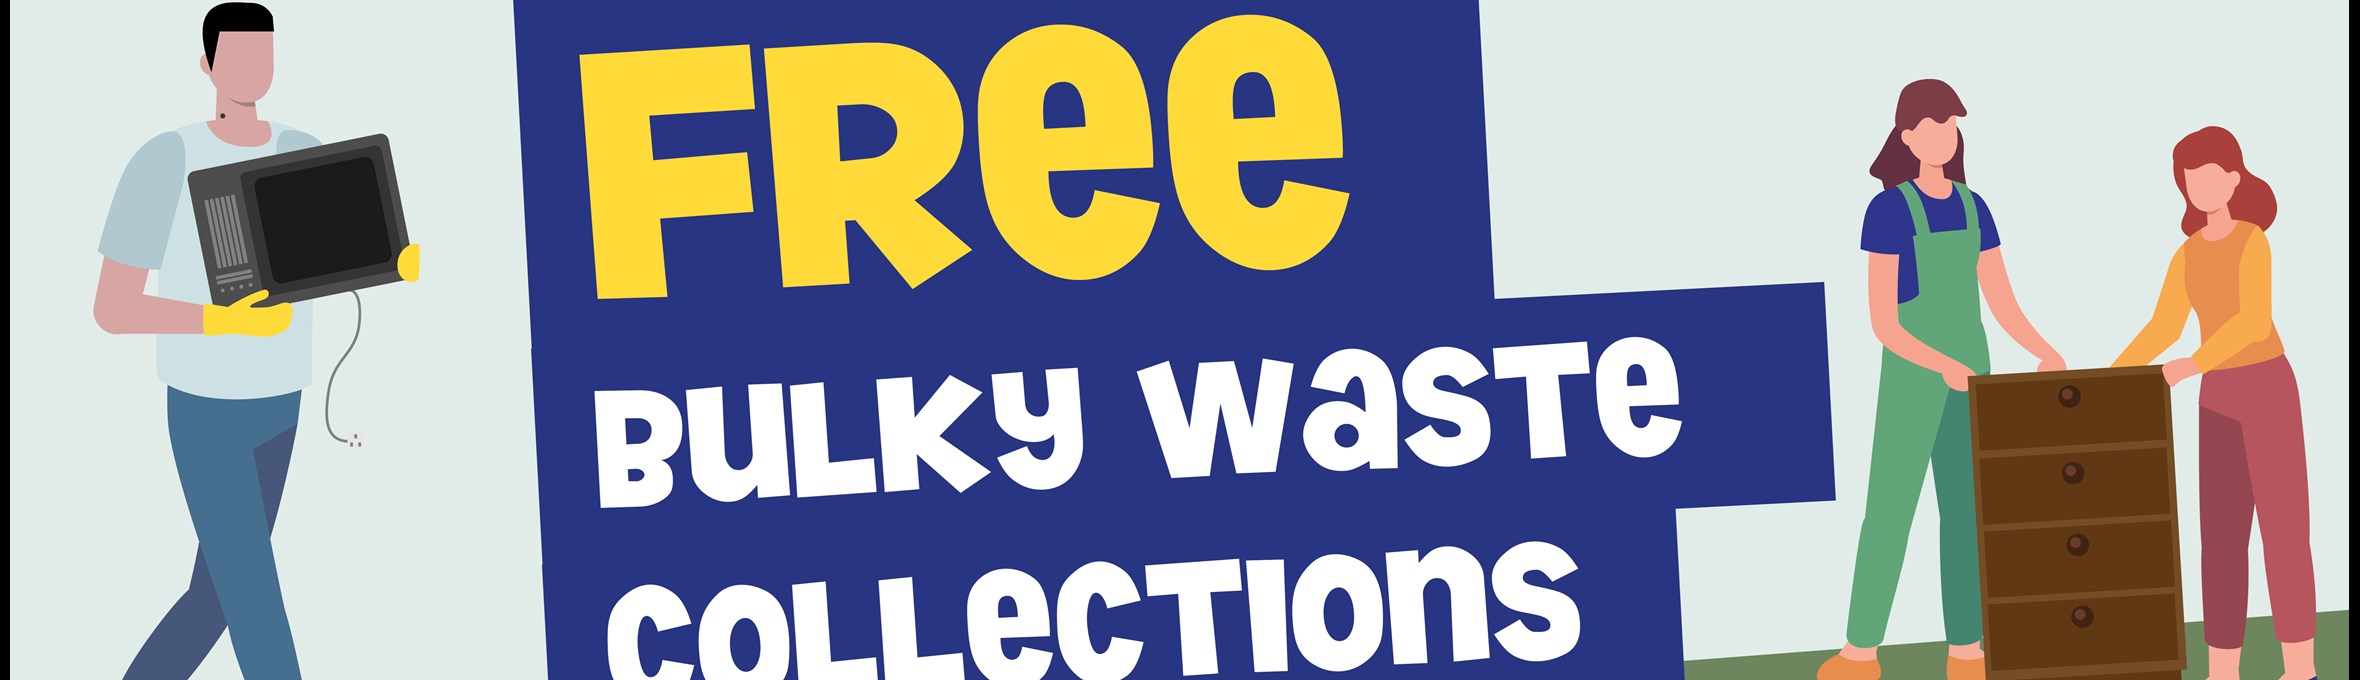 Free bulky waste collections available to book now